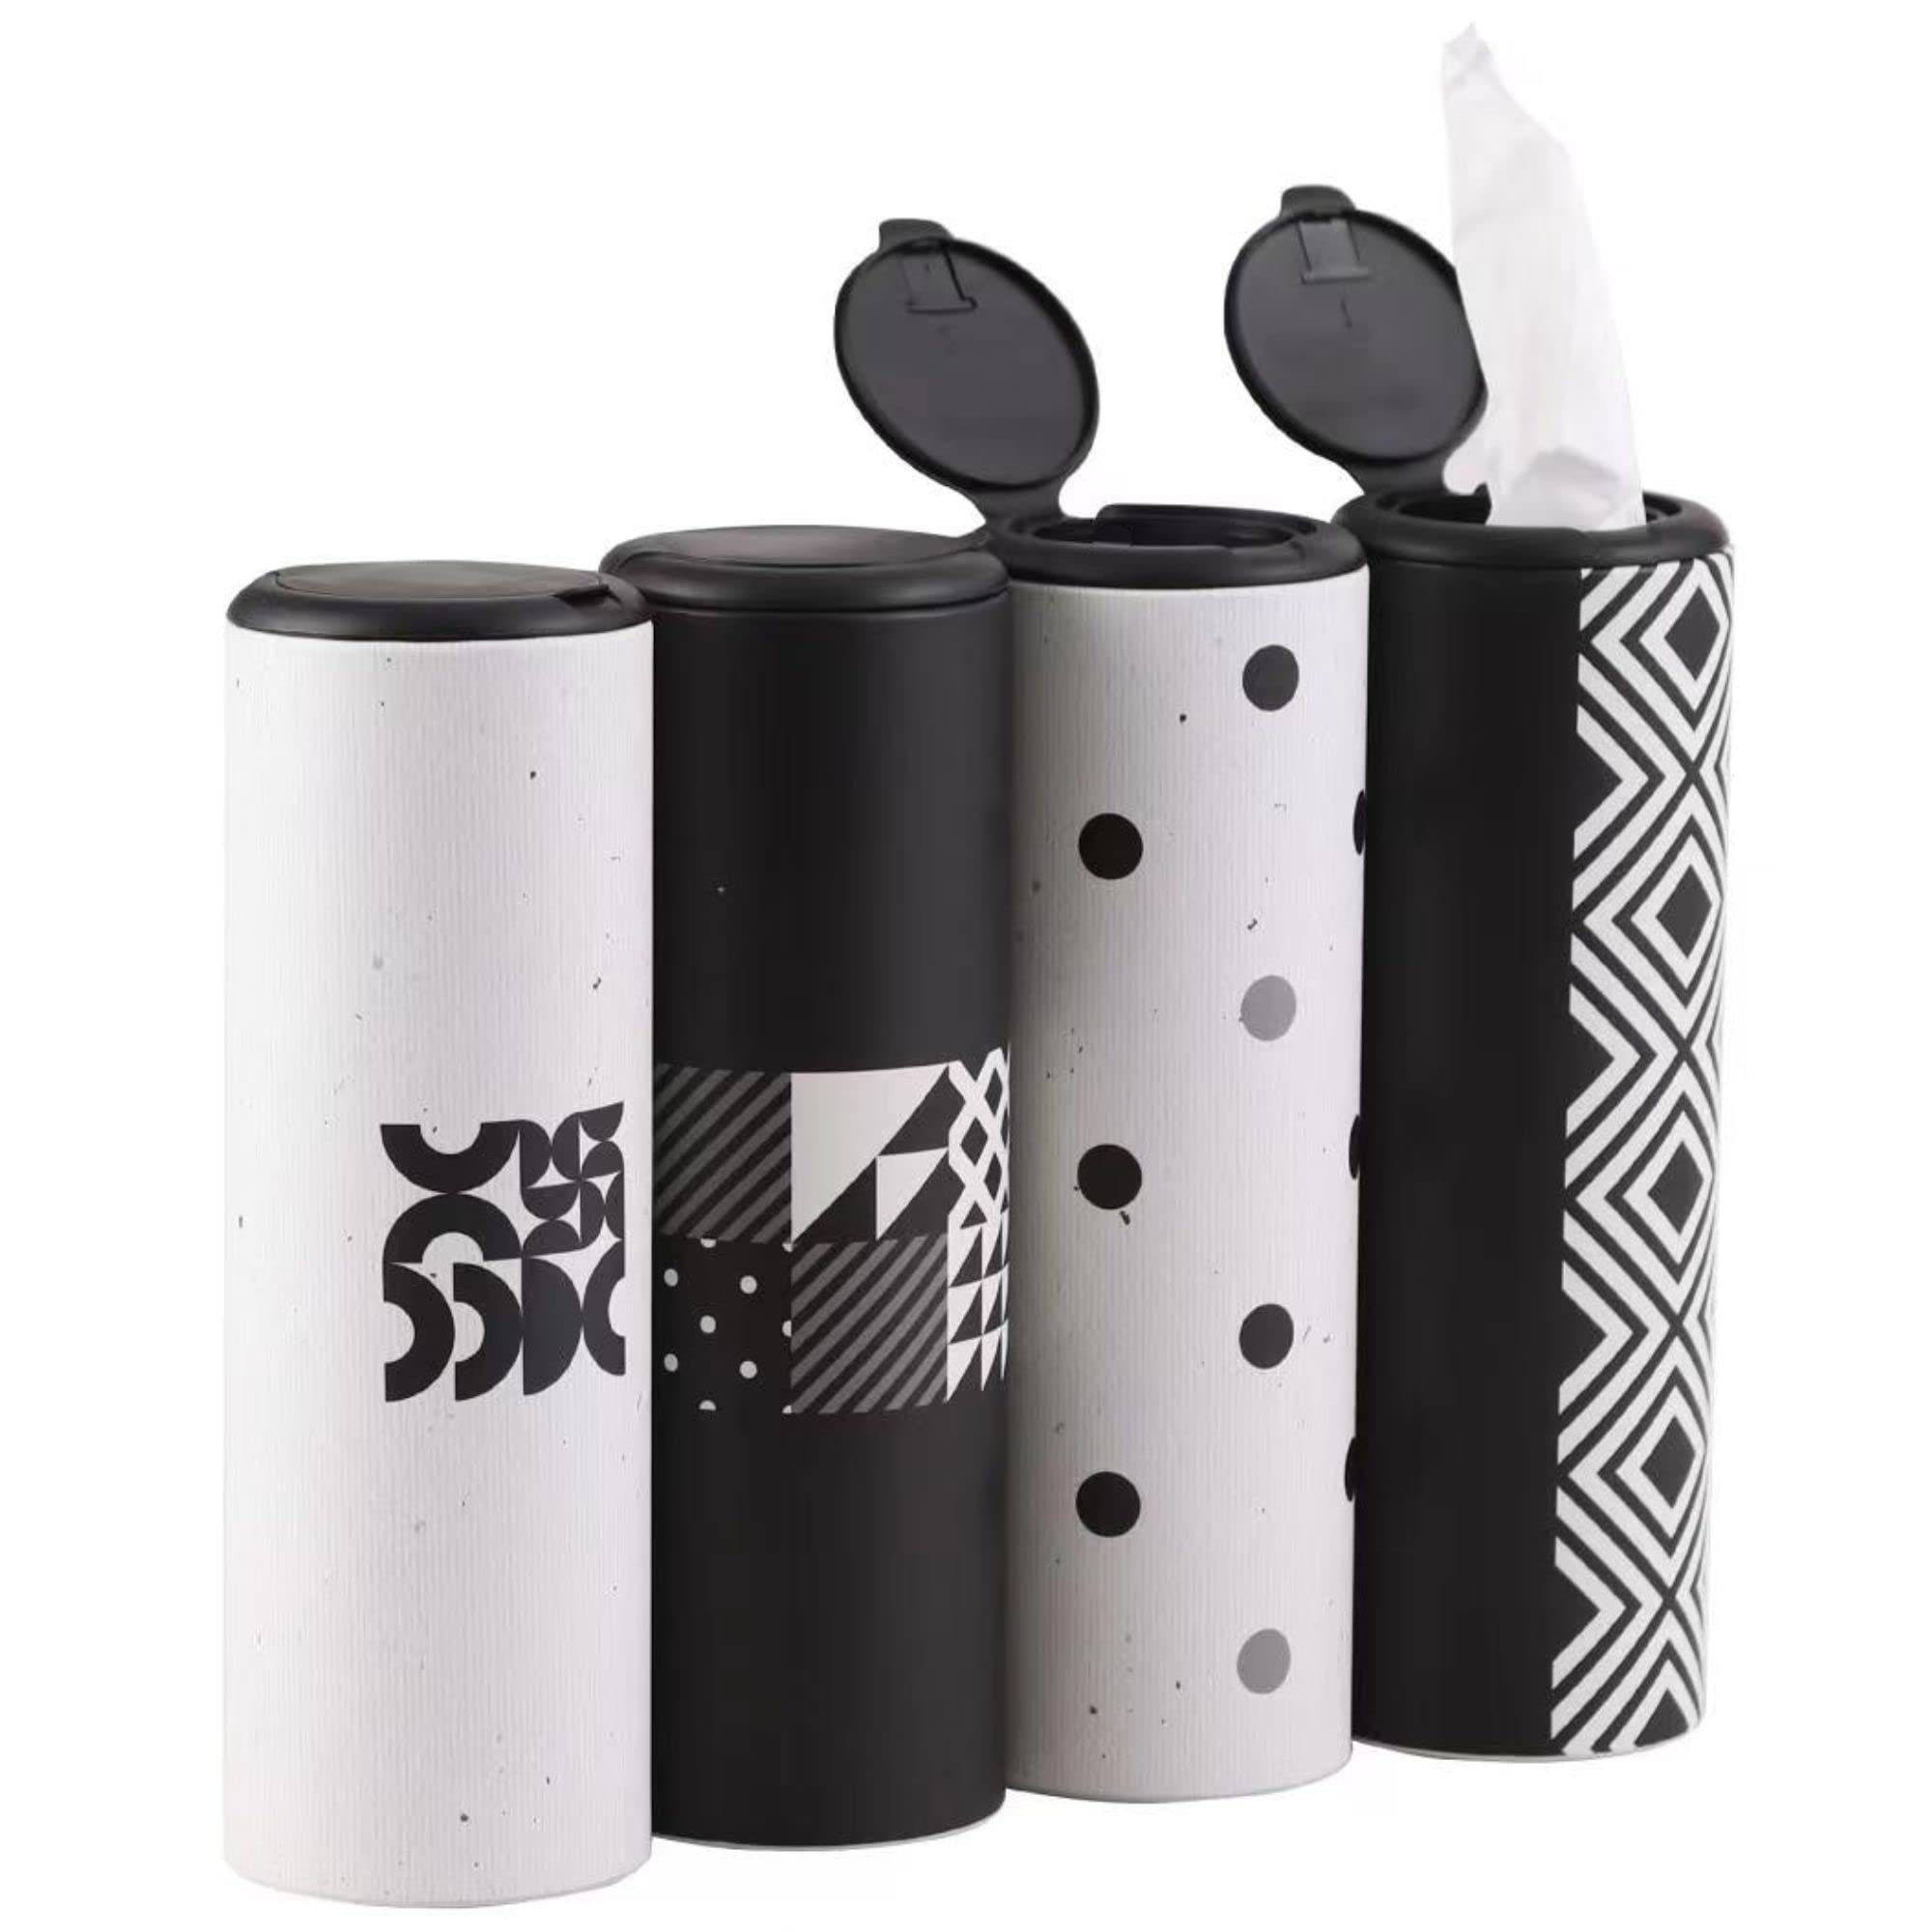 Car Tissue Holder with Facial Tissues - 2 